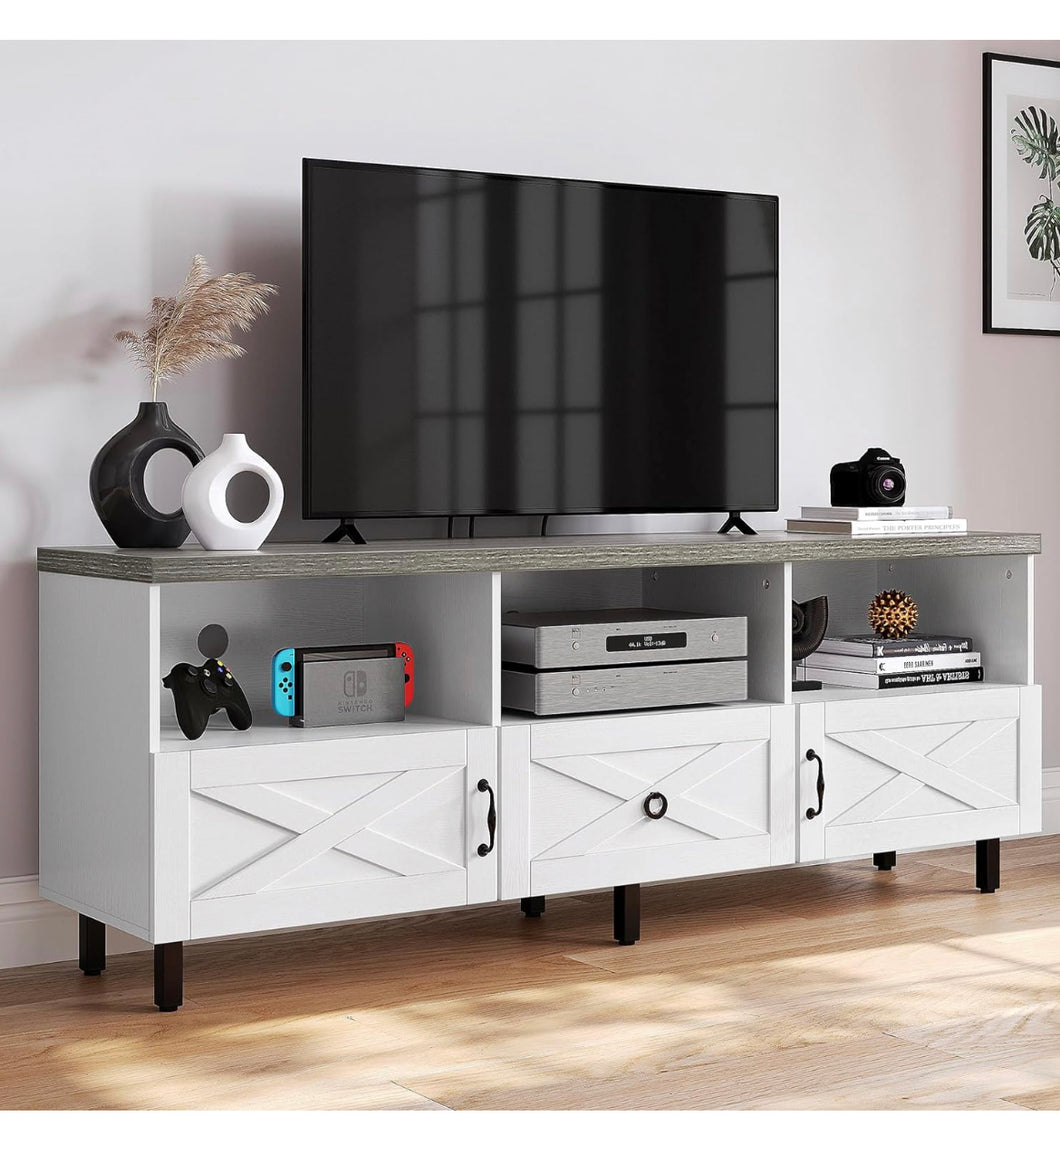 YITAHOME Mid-Century Modern TV Stand for 70/65/60/55 inch, Boho Wood TV Table Farmhouse Media Console with Storage Cabinet and Open Shelves for Living Room, Bedroom, 65 inch, White/Grey**New in box**